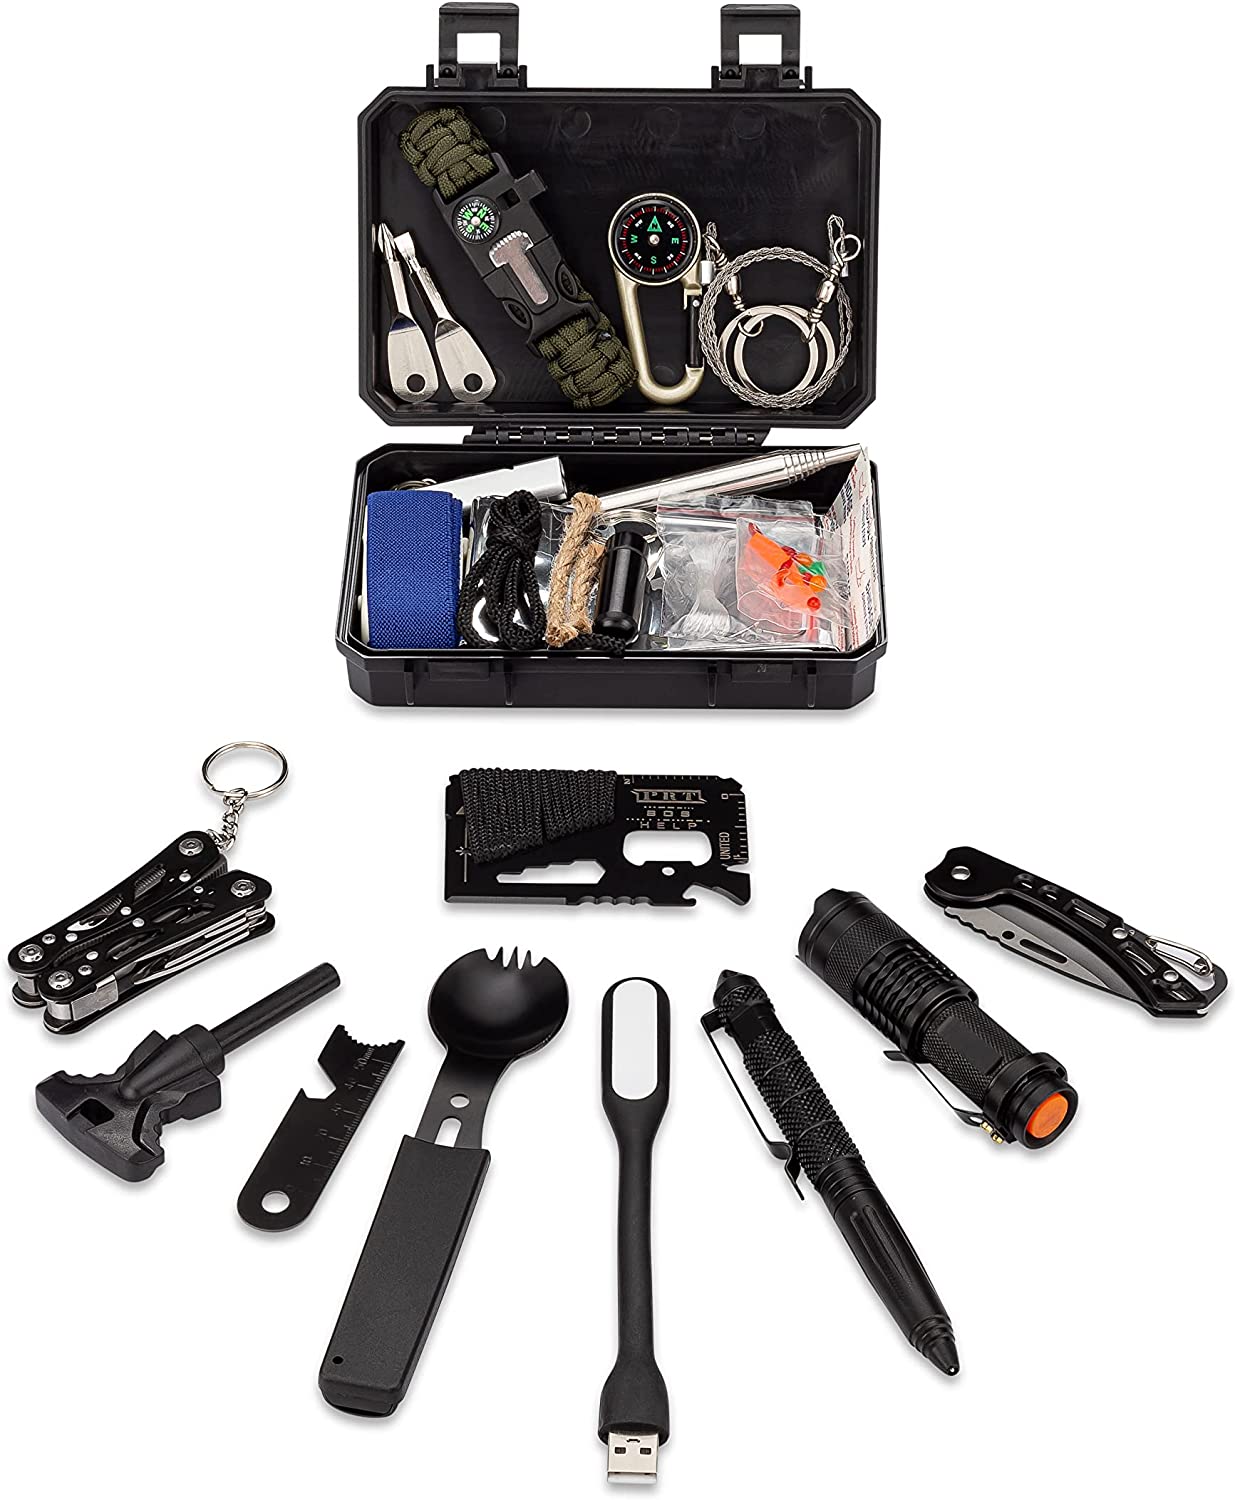 Compact Survival Kit 60 in 1 with SOS Flashlight, Multitools, Survival Bracelet with Whistle & Flint Striker, First Aid Supplies, Emergency Blanket, Fishing Line & Bait, Compass, Spork, Wire Saw